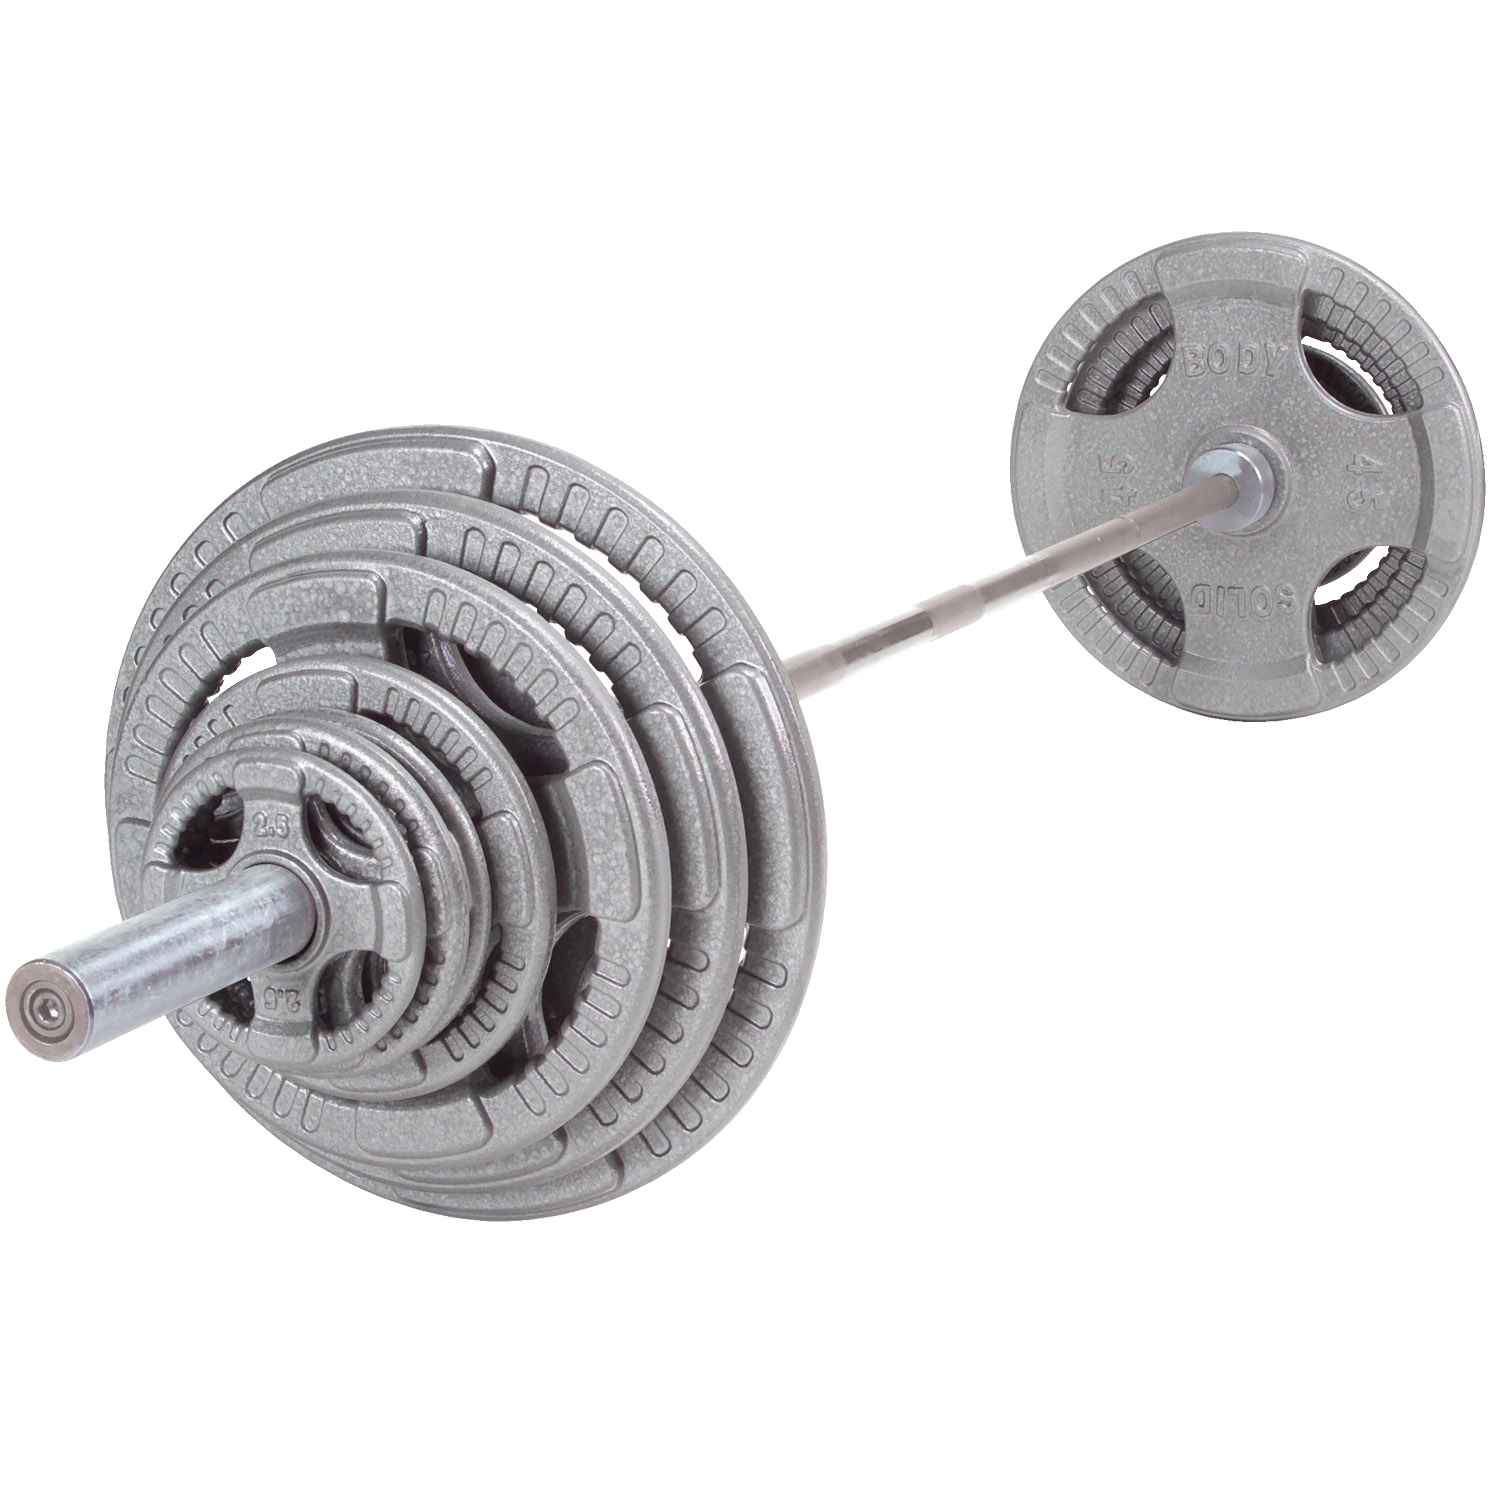 Body-Solid Steel Olympic Grip Plate Set with Bar plate Body-Solid Iron 